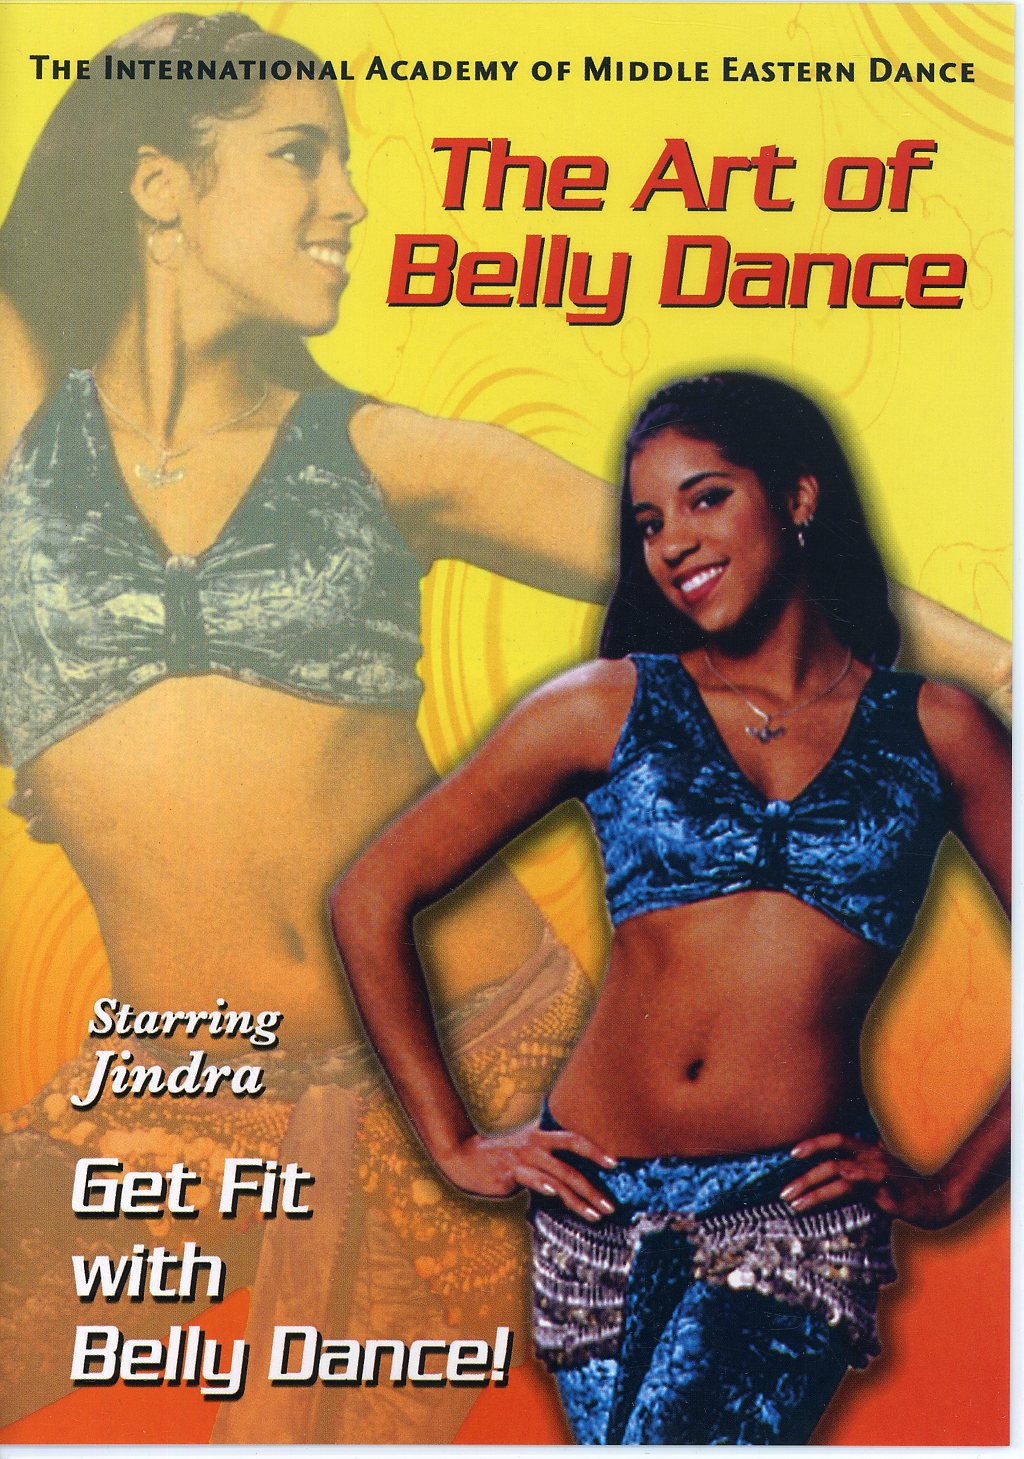 JINDRA: THE ART OF BELLYDANCE - GET FIT WITH BELLY